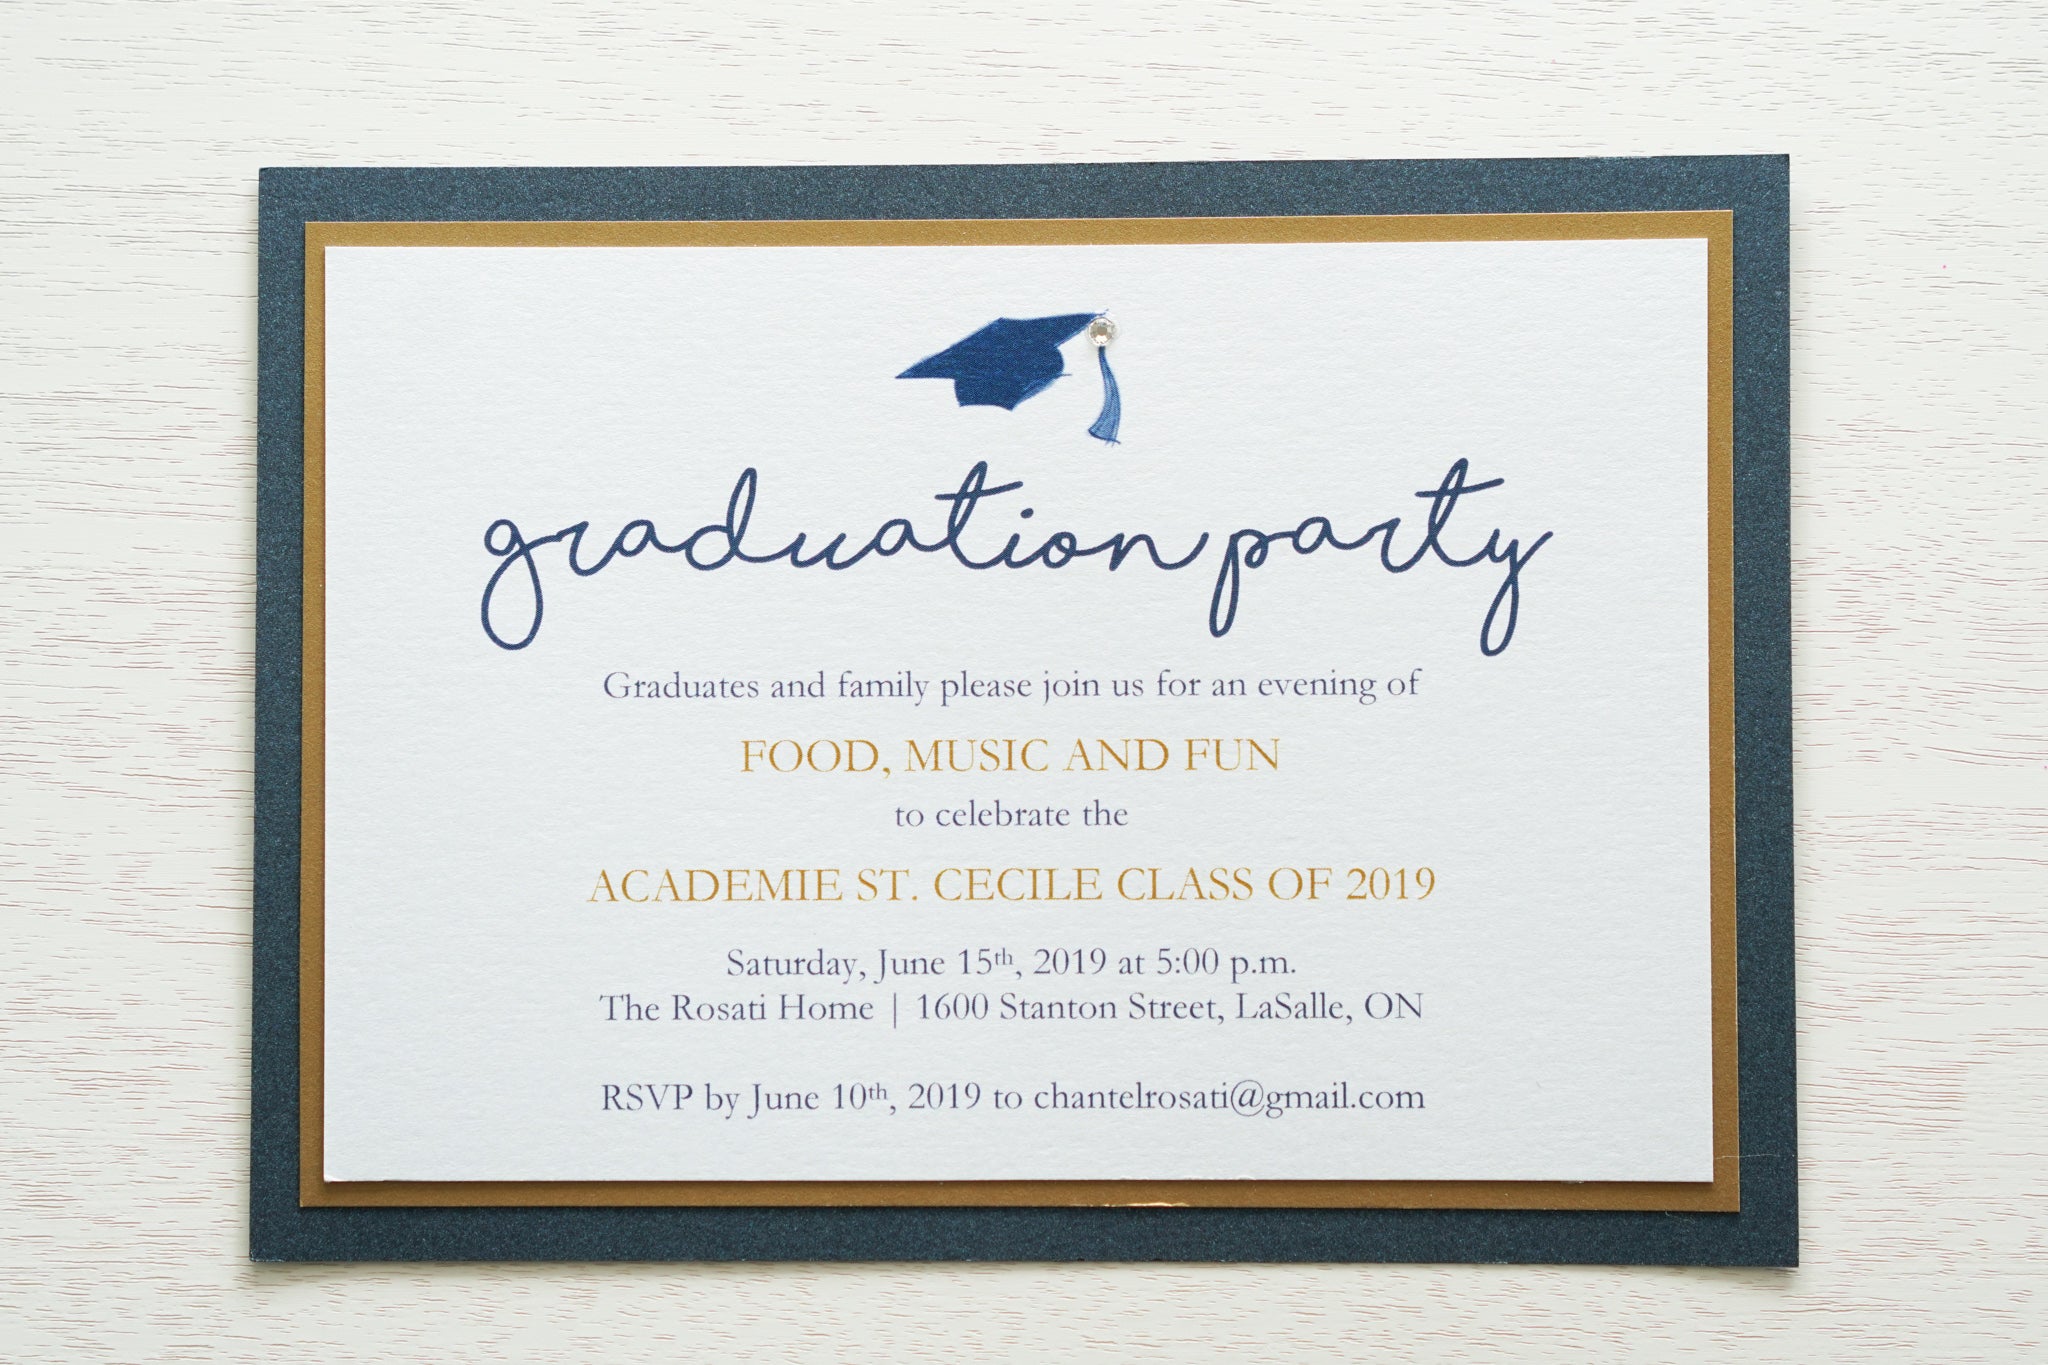 alt="Classic graduation party invitation features a white pearlescent shimmer stock on gold leaf and navy blue pearlescent shimmer card stock layers, a blue grad cap and jewel detail and a modern script font"